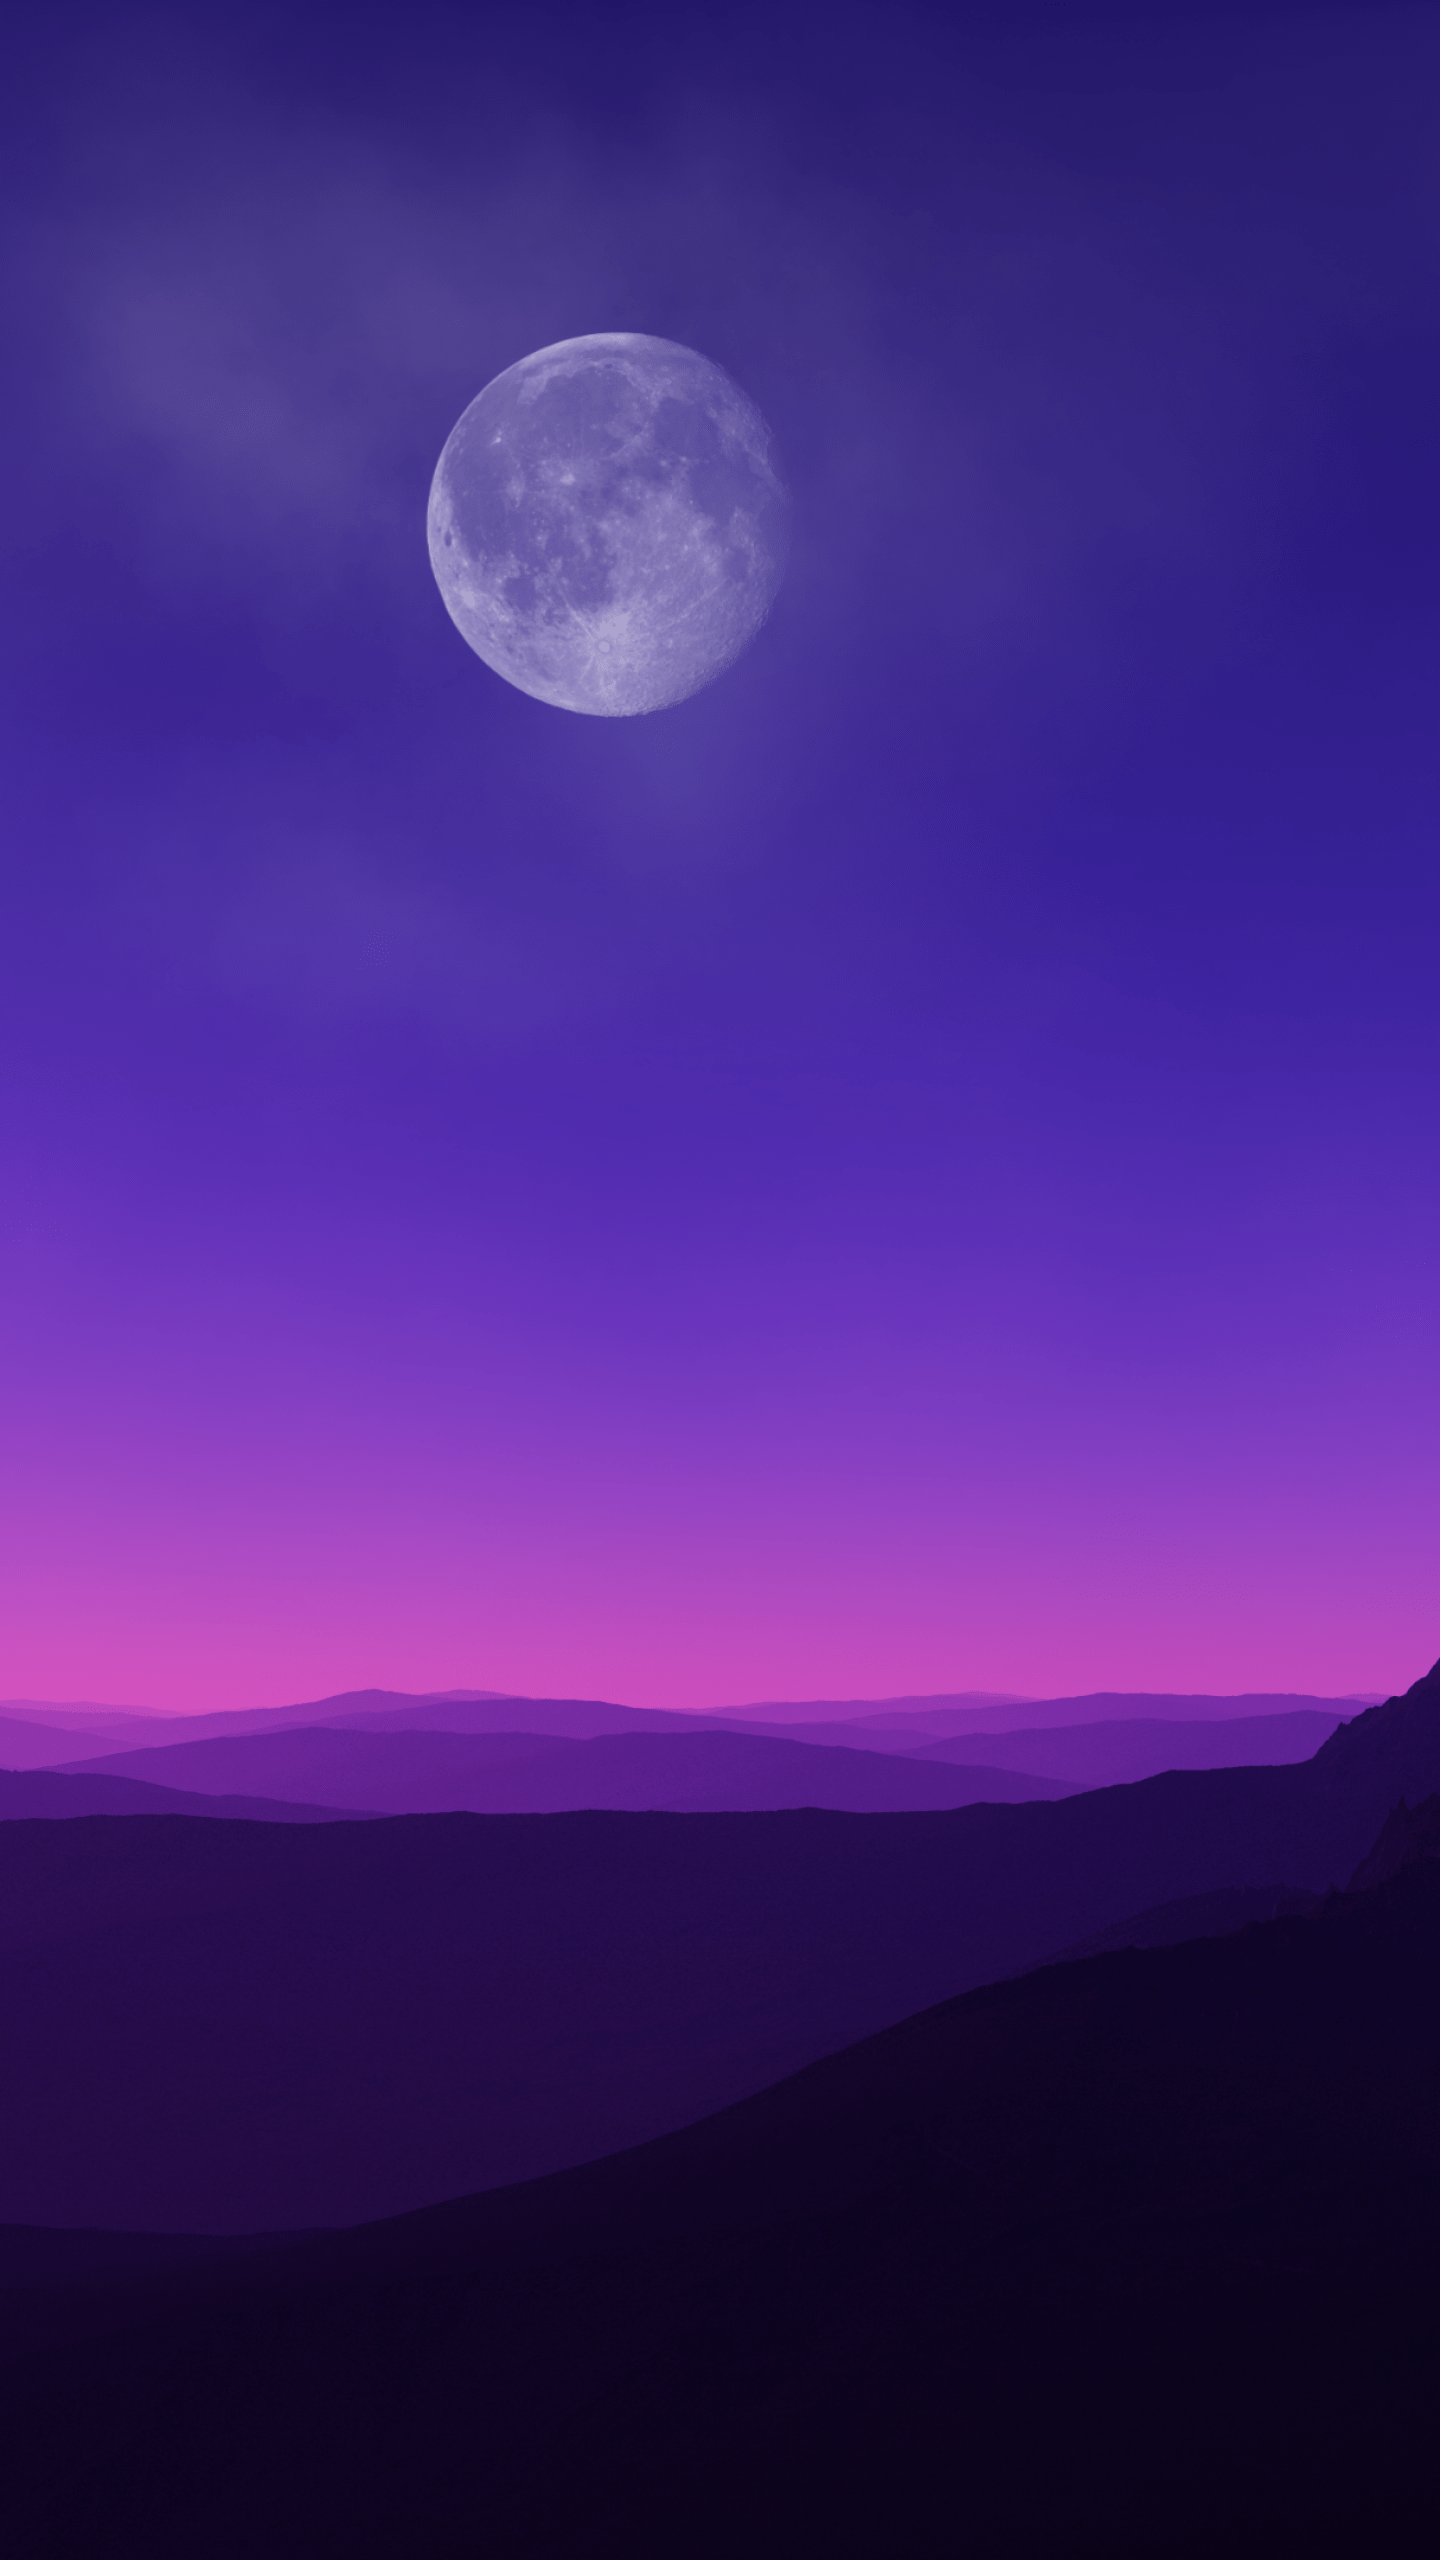 A purple sky with the moon in it - Capricorn